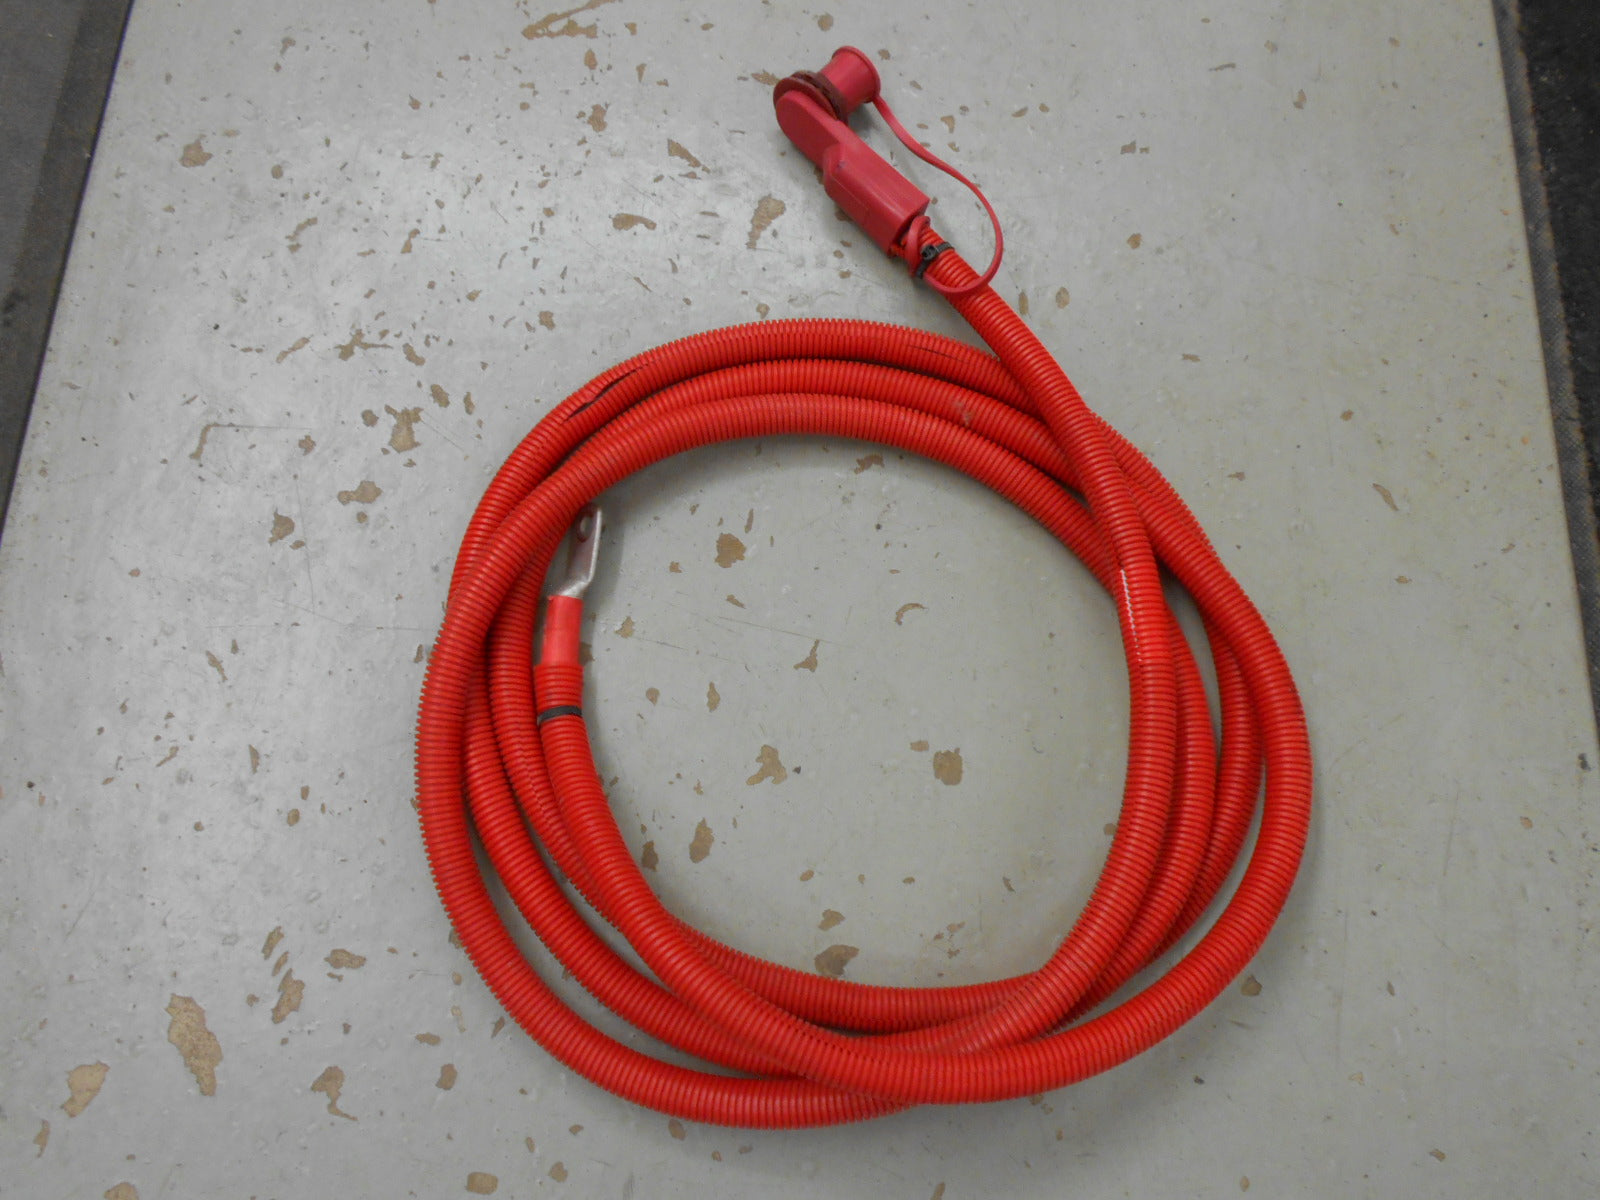 JUMPER CABLE - N92-6006-2A8SU0475